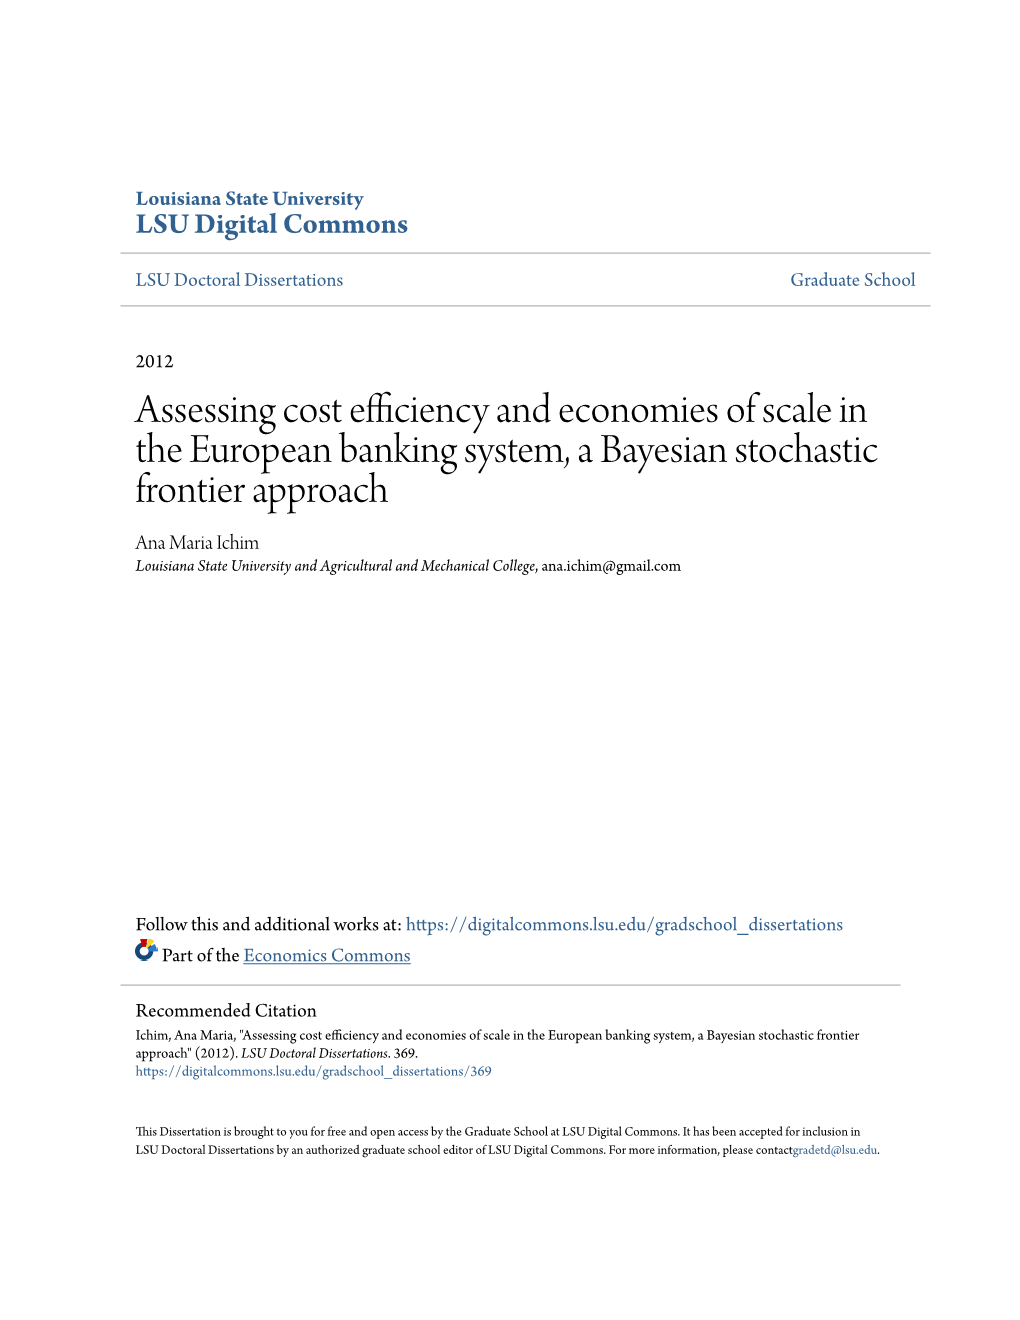 Assessing Cost Efficiency and Economies of Scale in the European